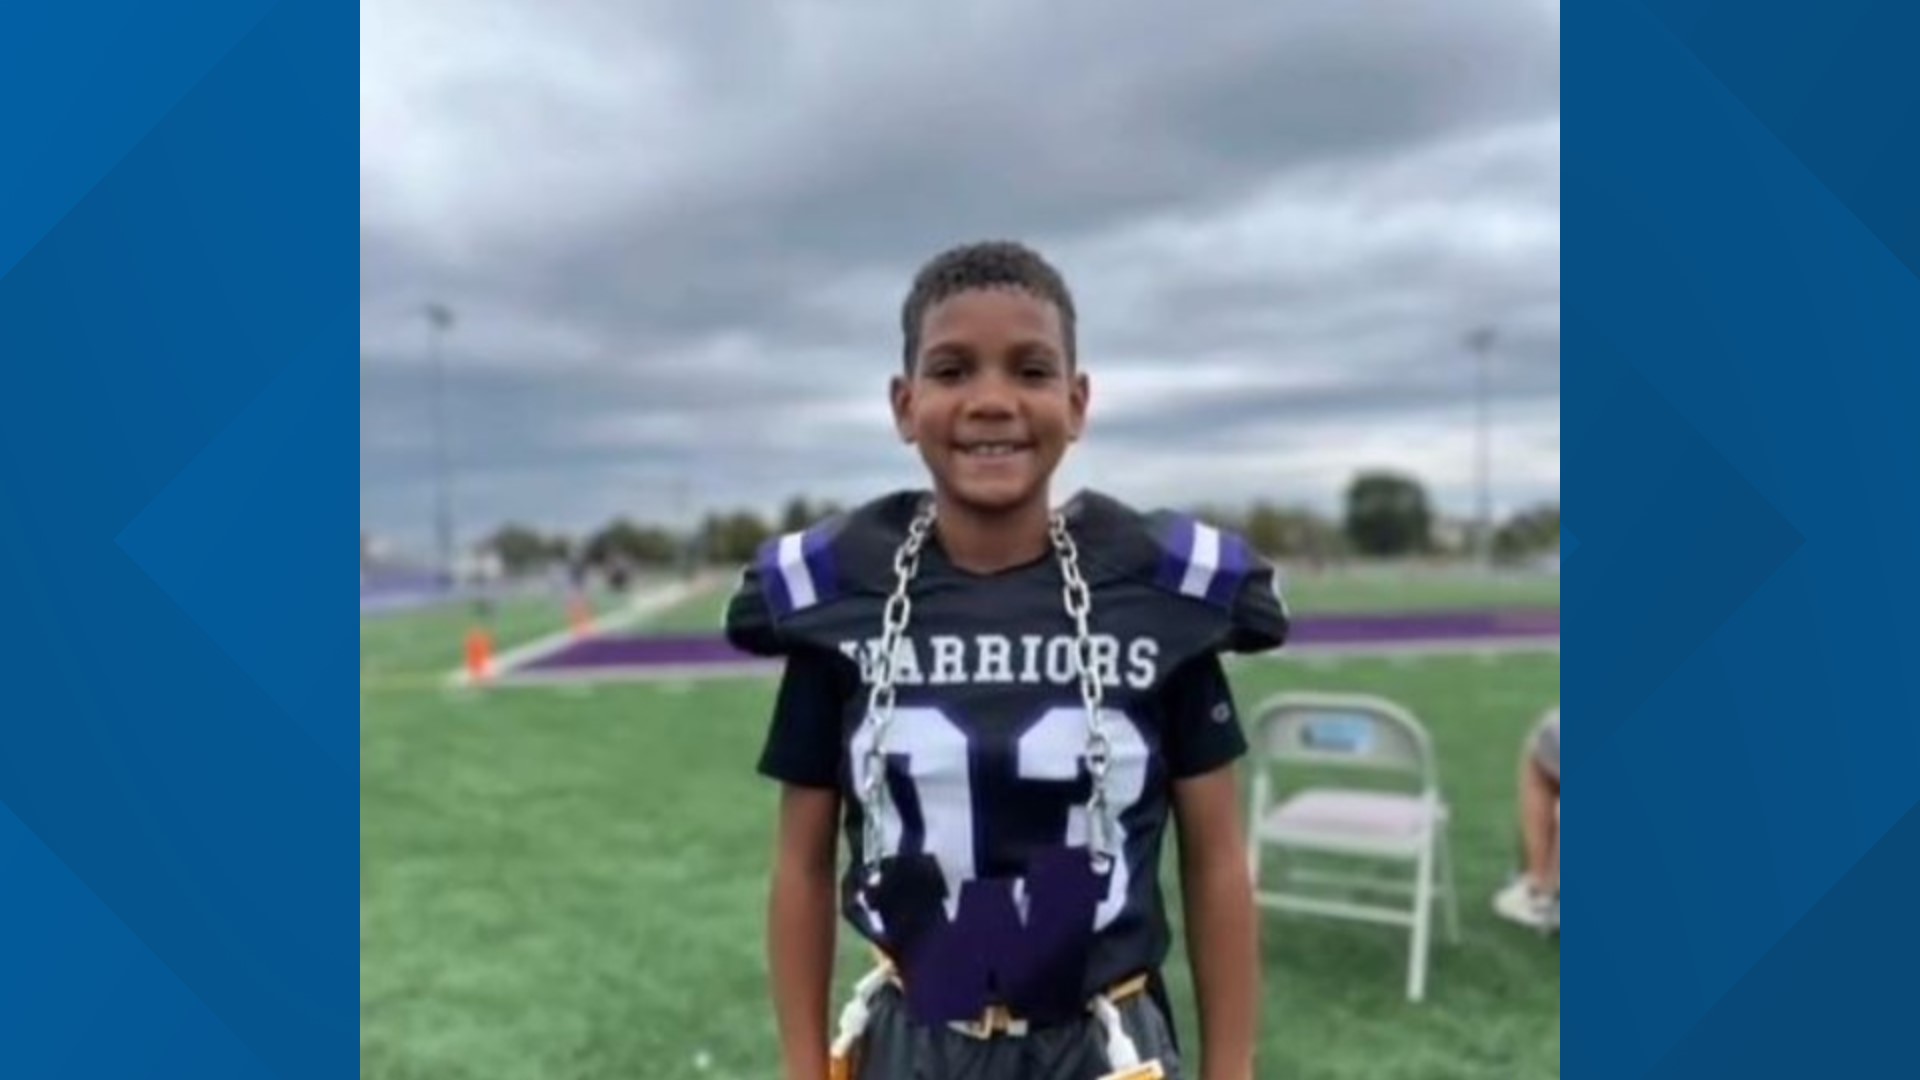 Aiden James-Harrison Smith's family told Local 5 he was a talented athlete, competing in Waukee’s youth football and baseball leagues.